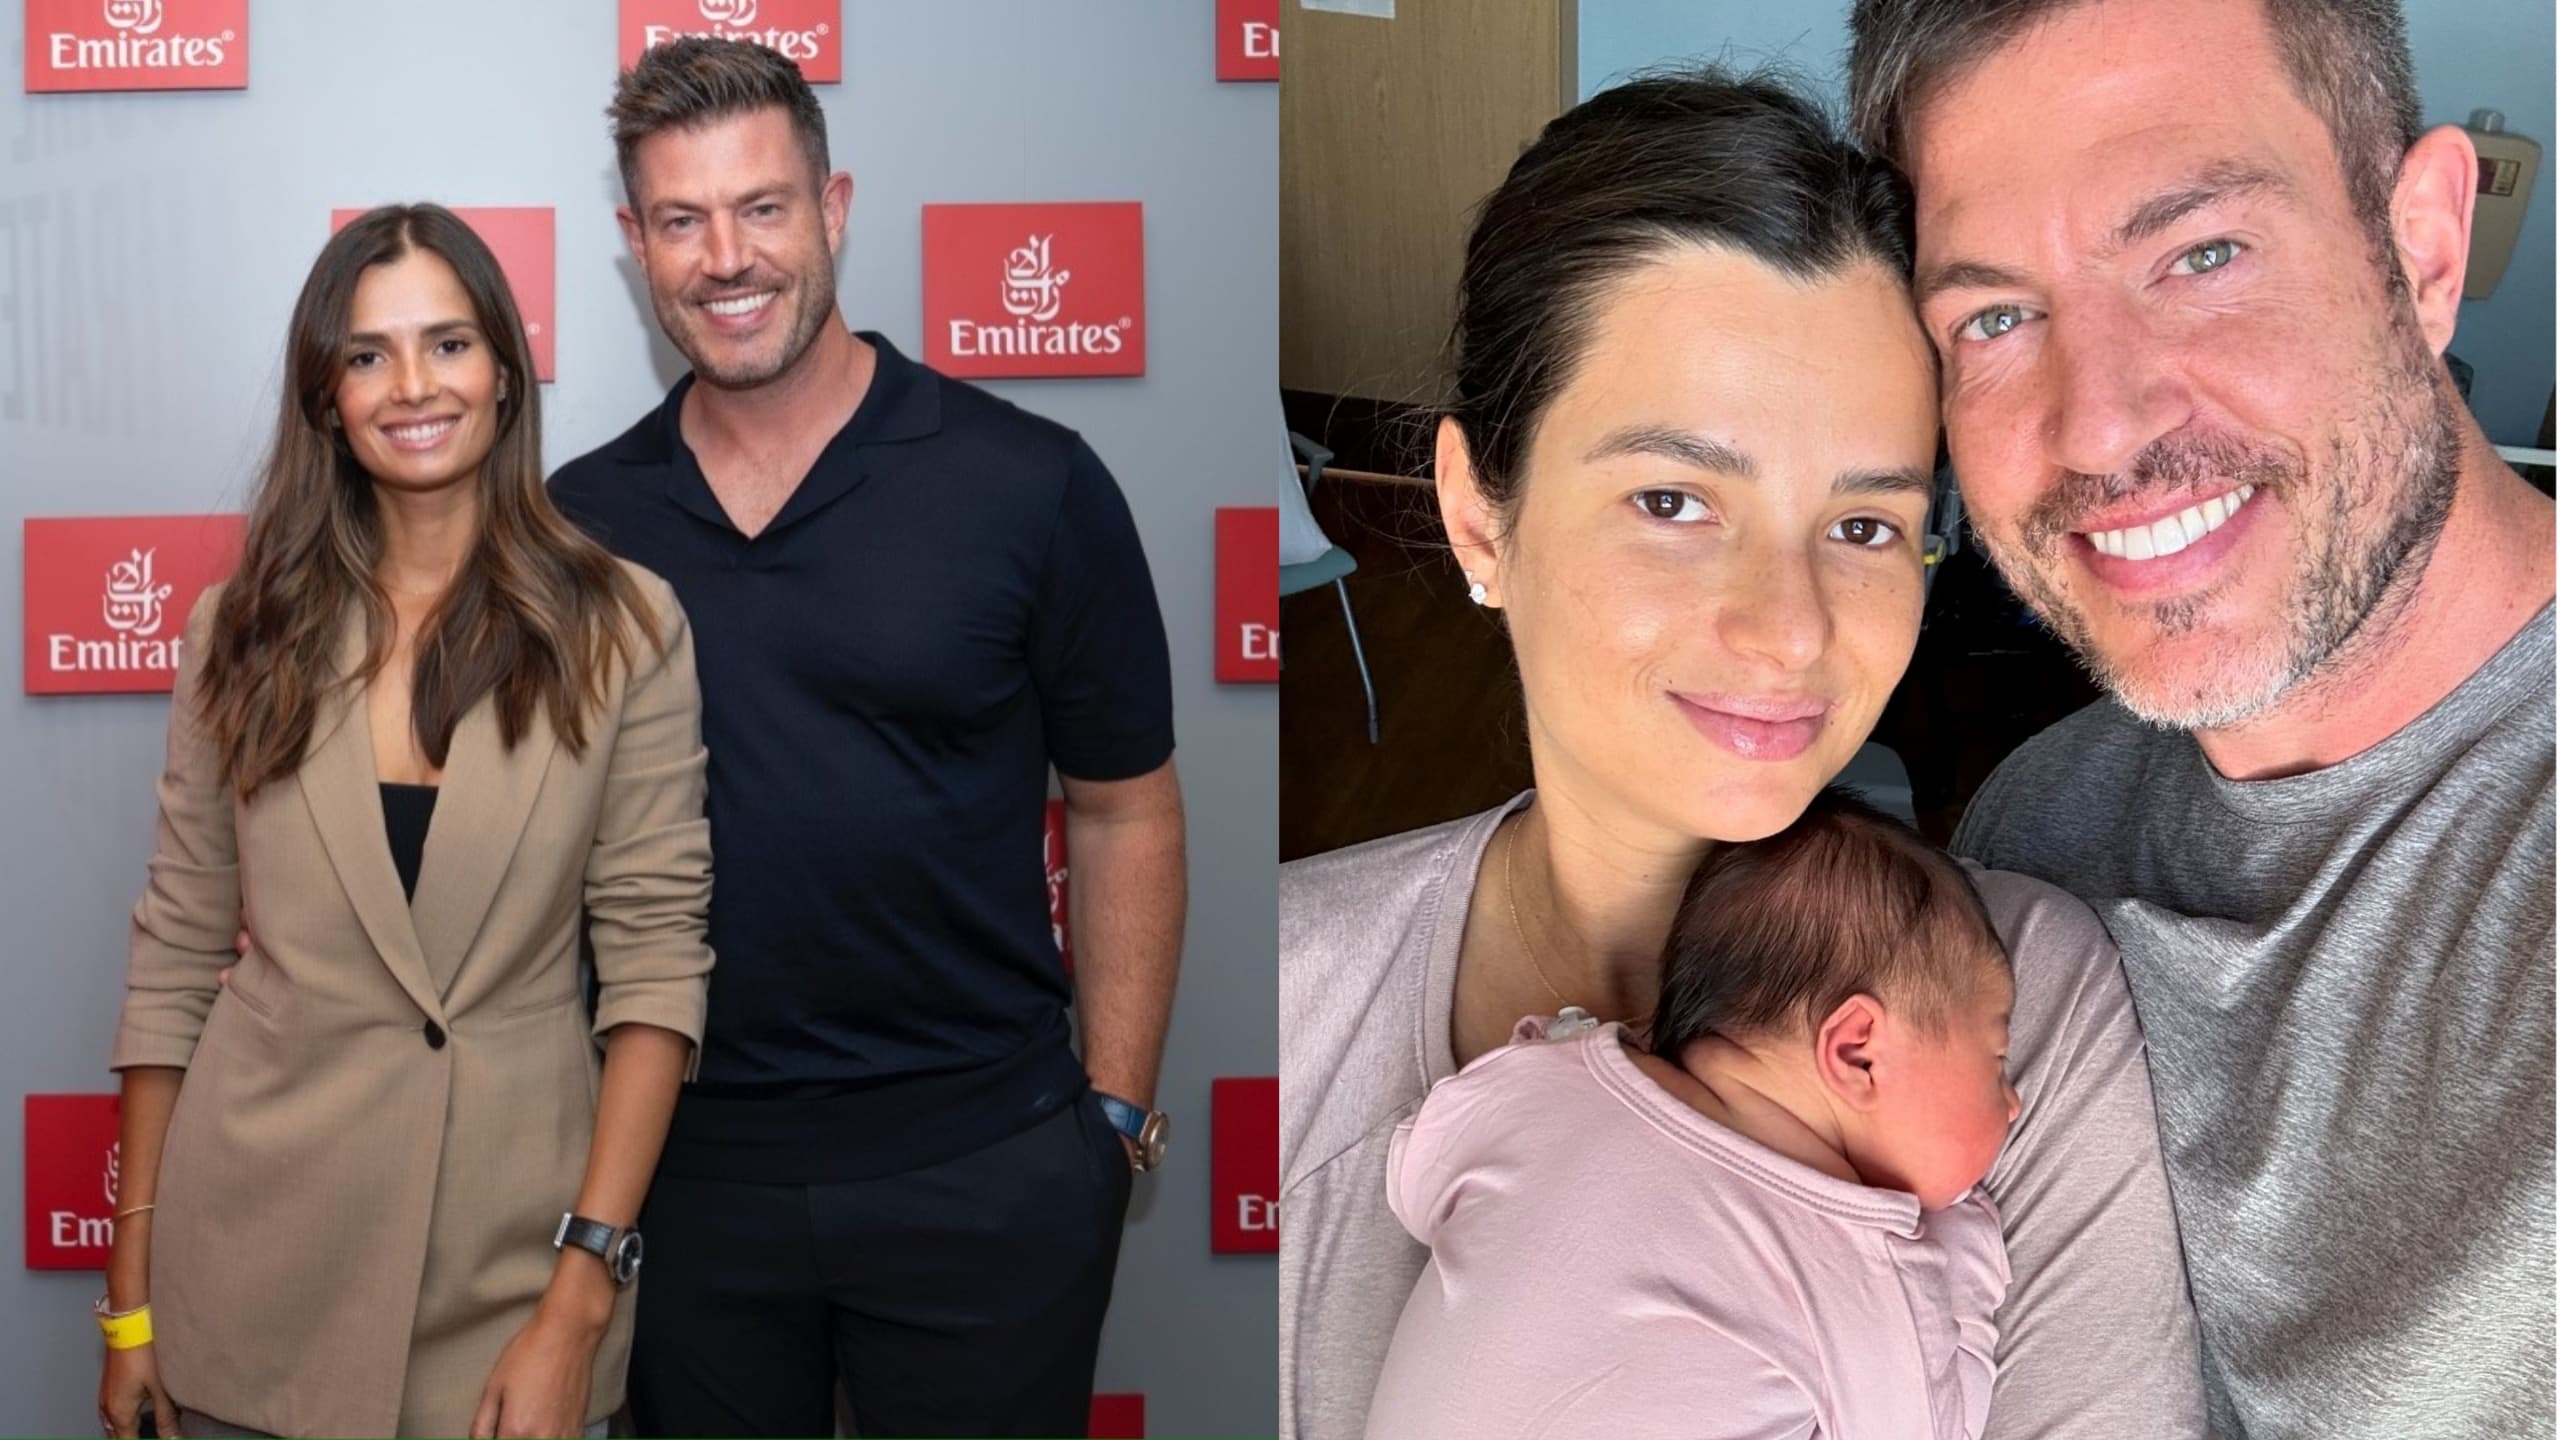 Jesse Palmer and his wife welcomed their first child.